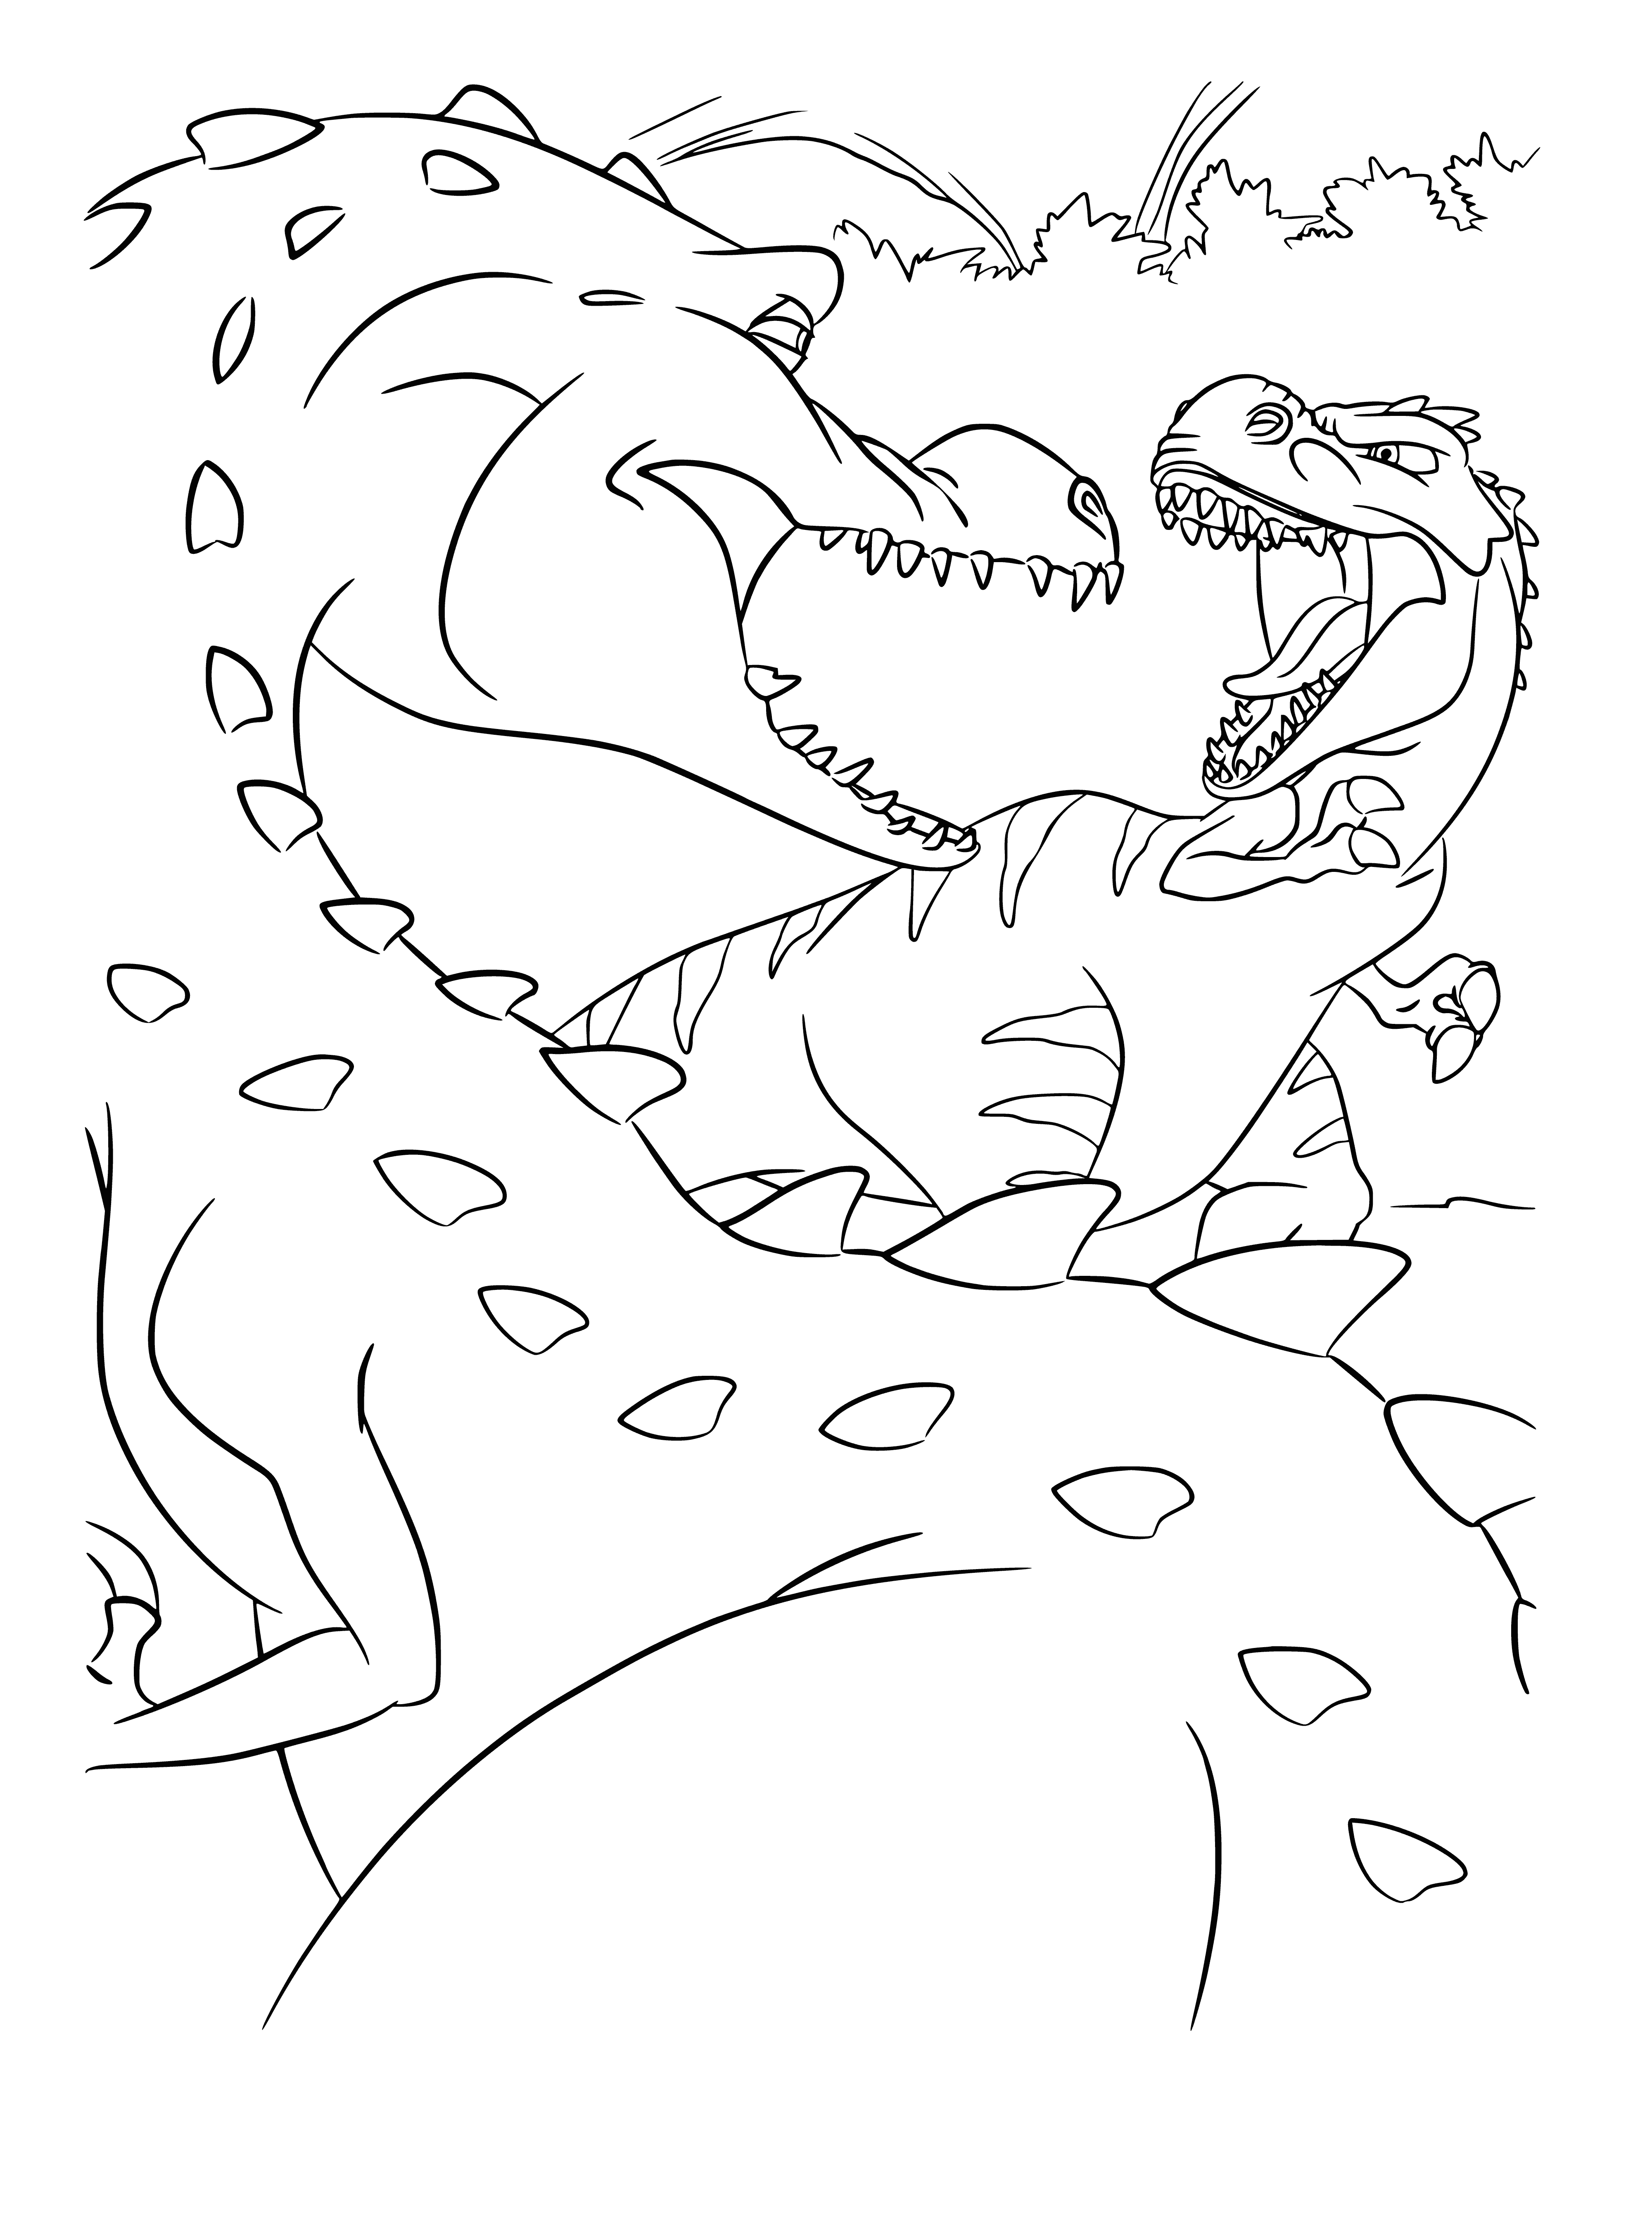 coloring page: Two dinos, one large and grey, one small and brown, stand together looking at each other, the smaller one with tail up.